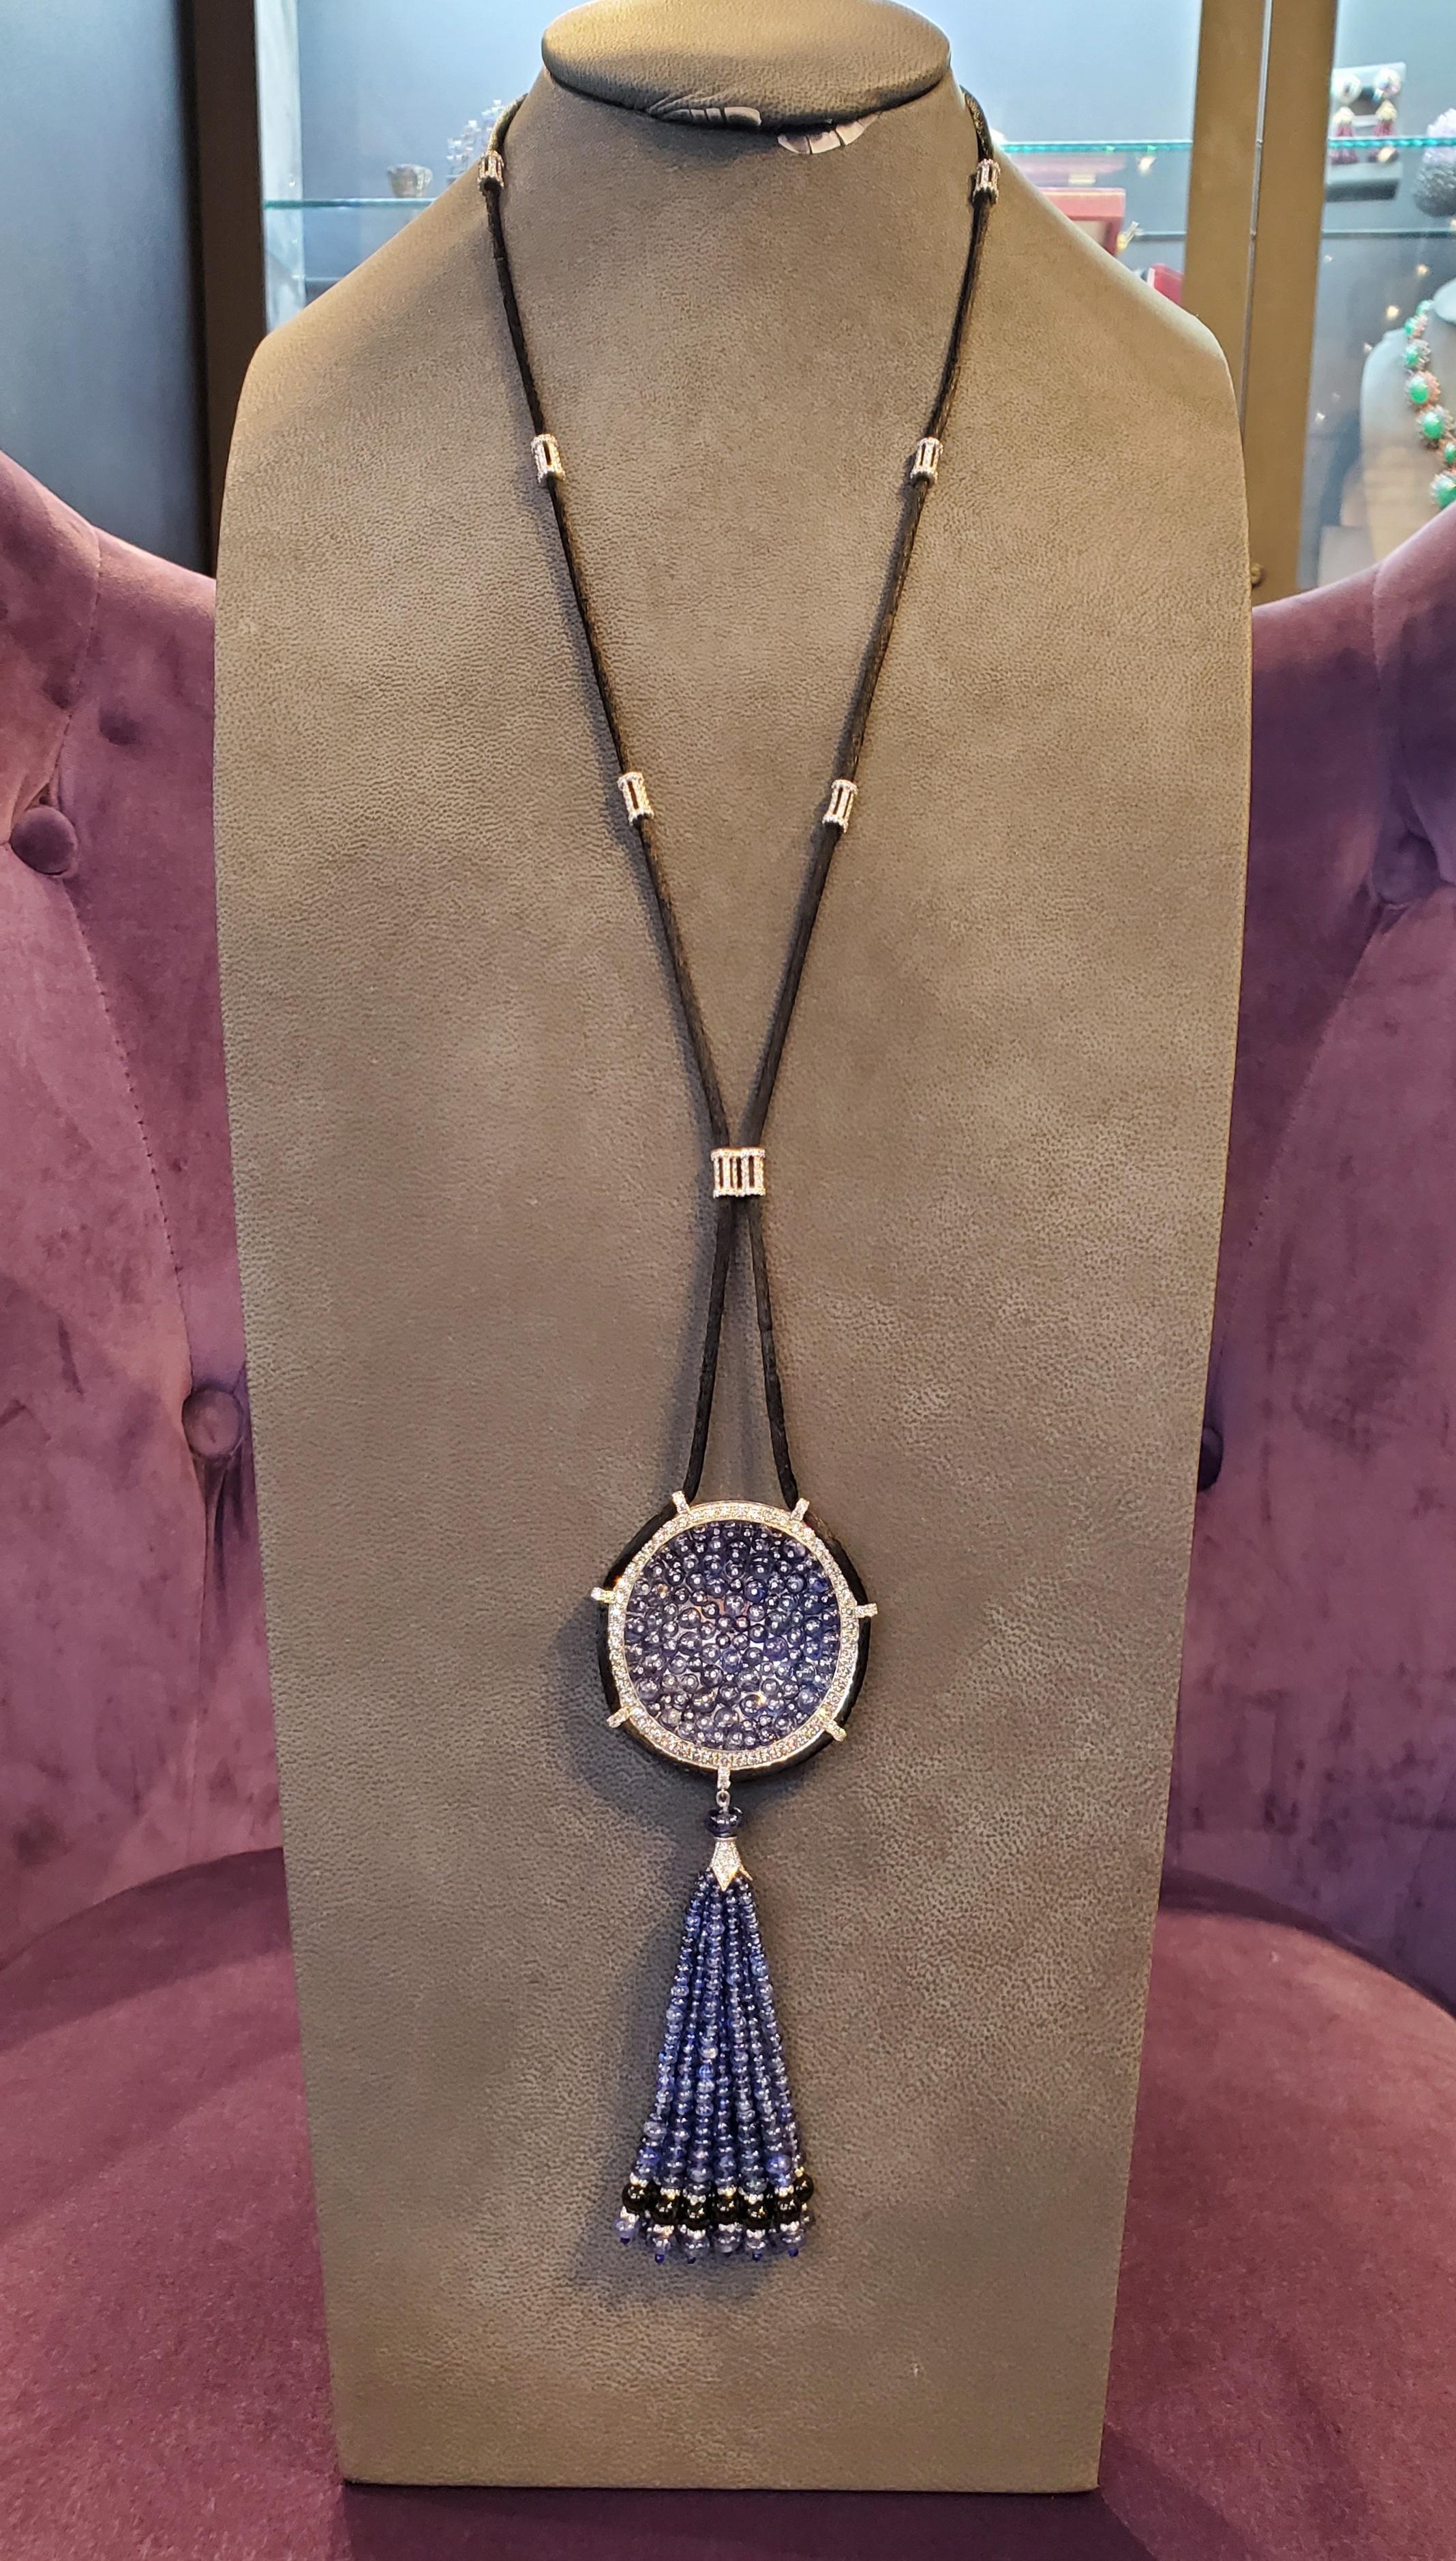 Sapphire & Diamond Sautoir Tassel Necklace

Length: approximately 28 inches 

Features an array of sapphires surrounded by diamonds followed by strands with sapphire beads mounted on silk